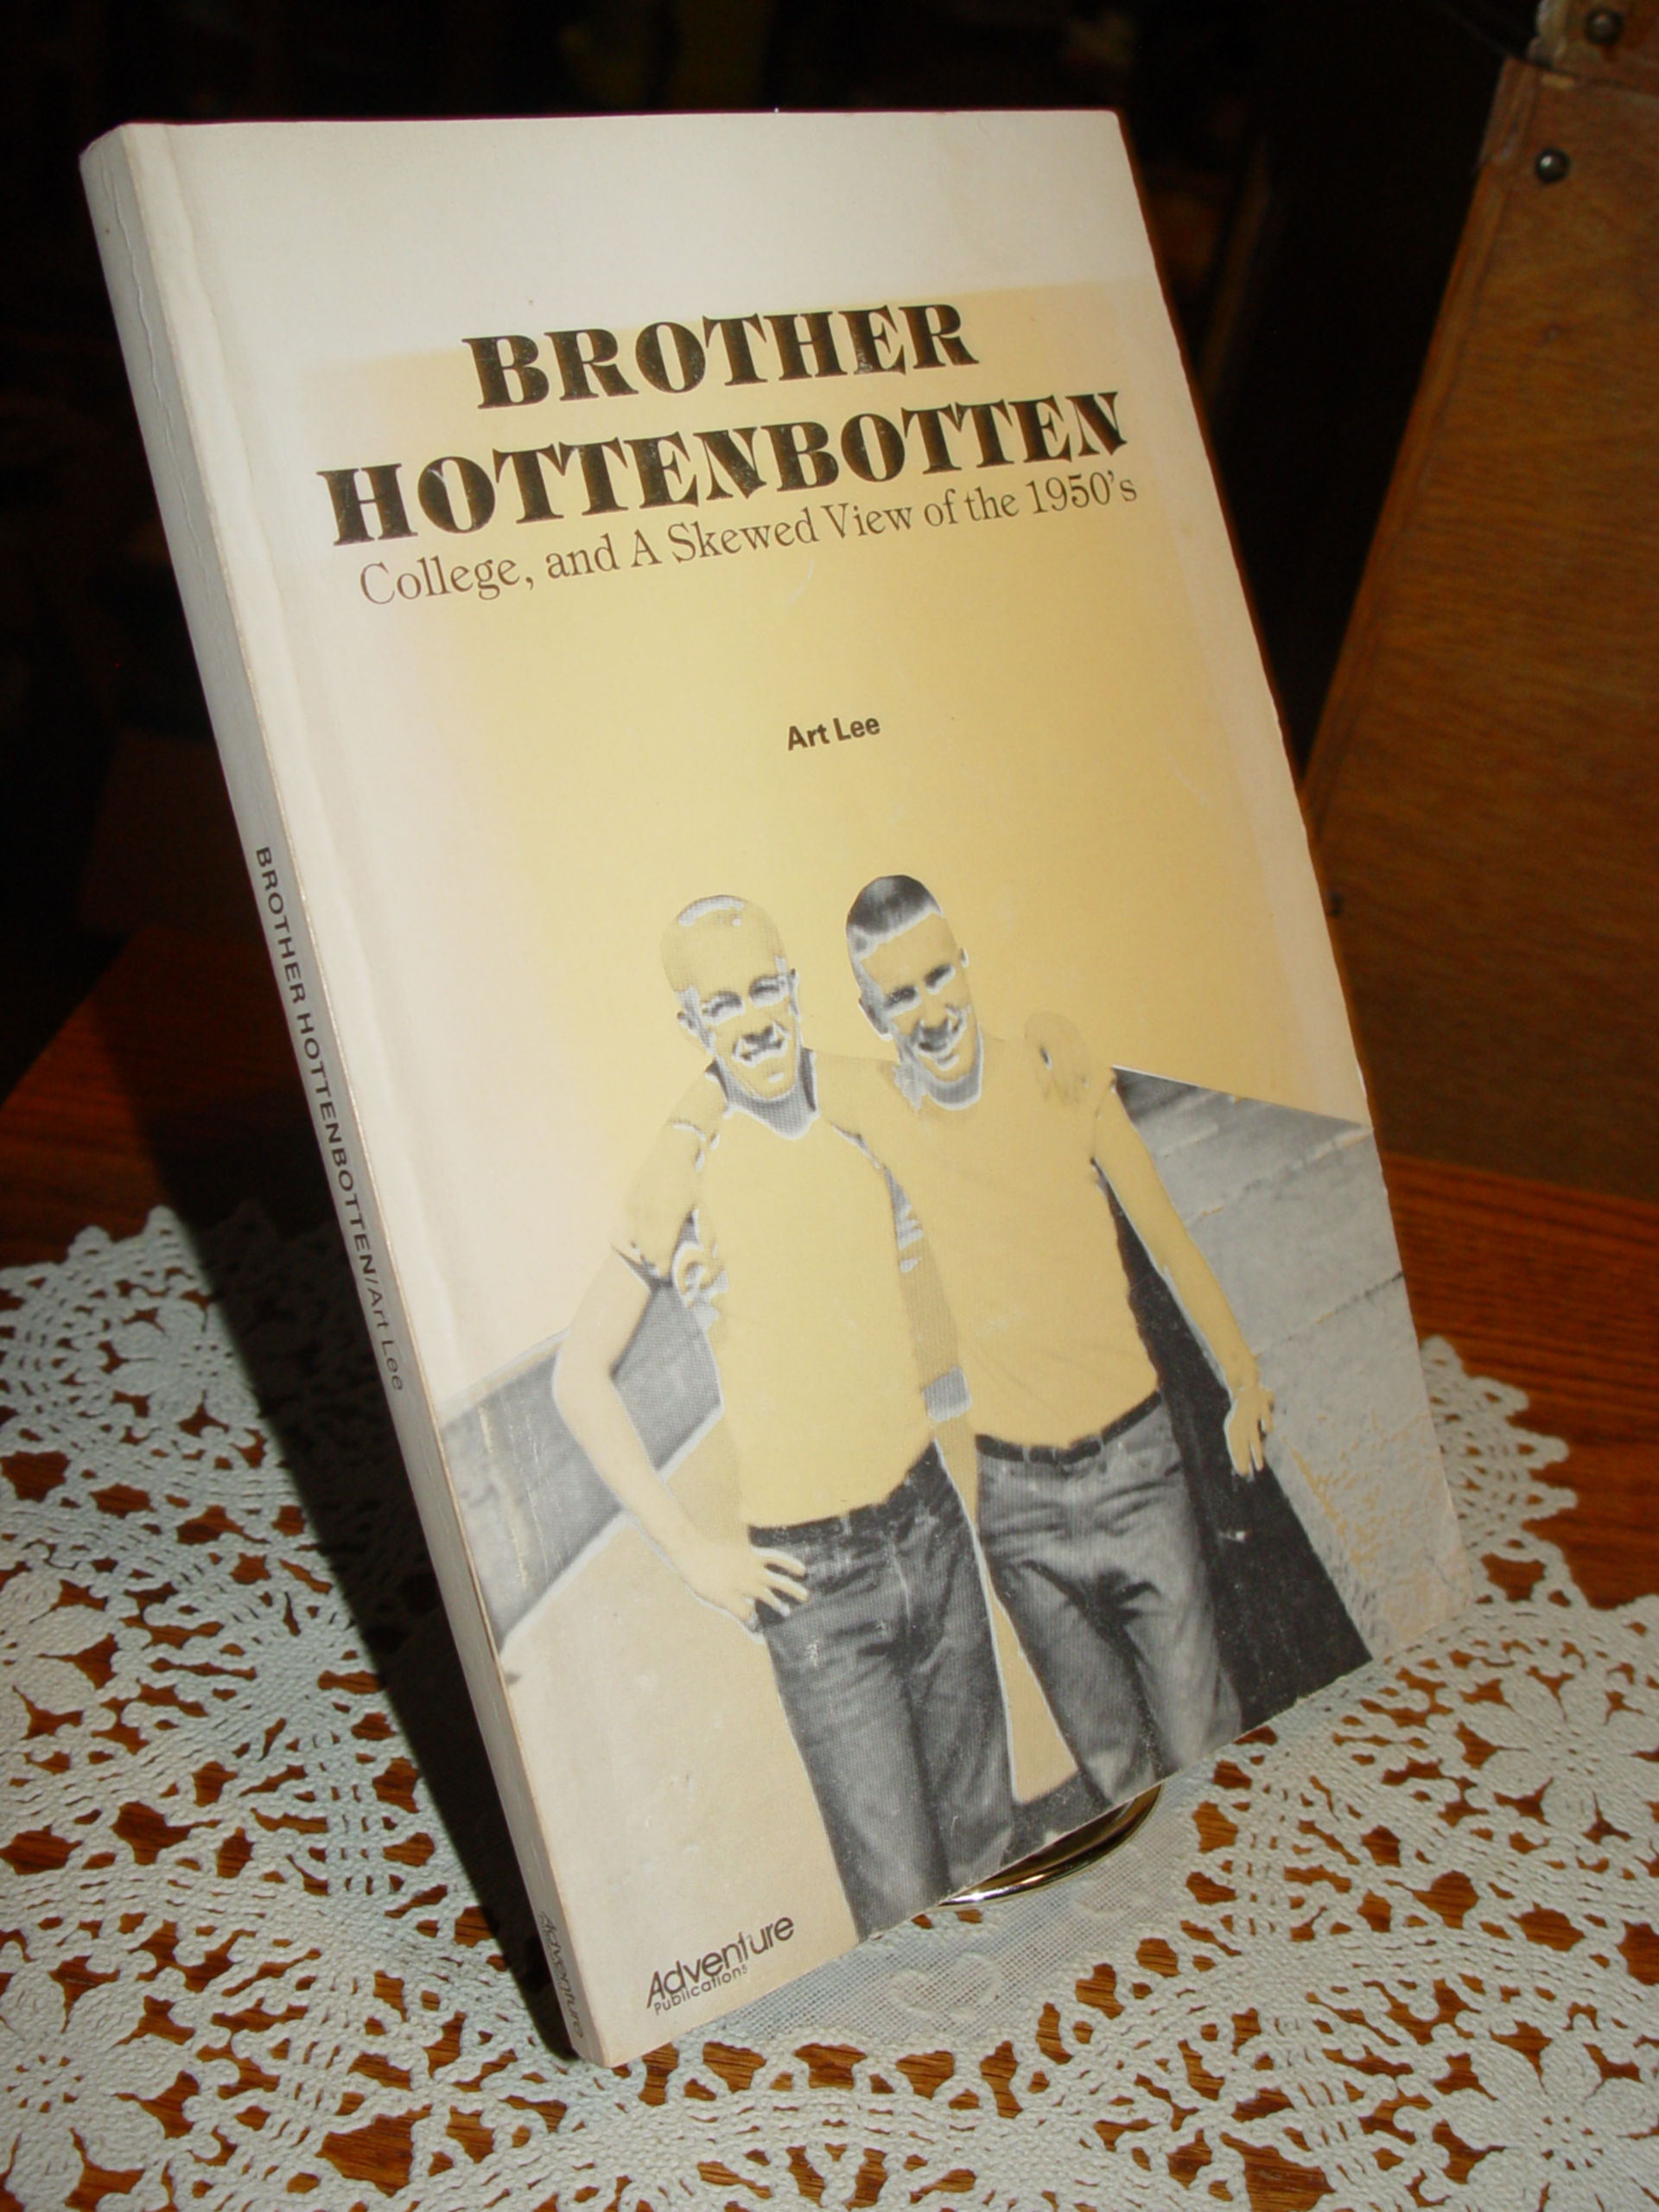 Brother
                        Hottenbotten; College, and A Skewed View of the
                        1950's by Art Lee